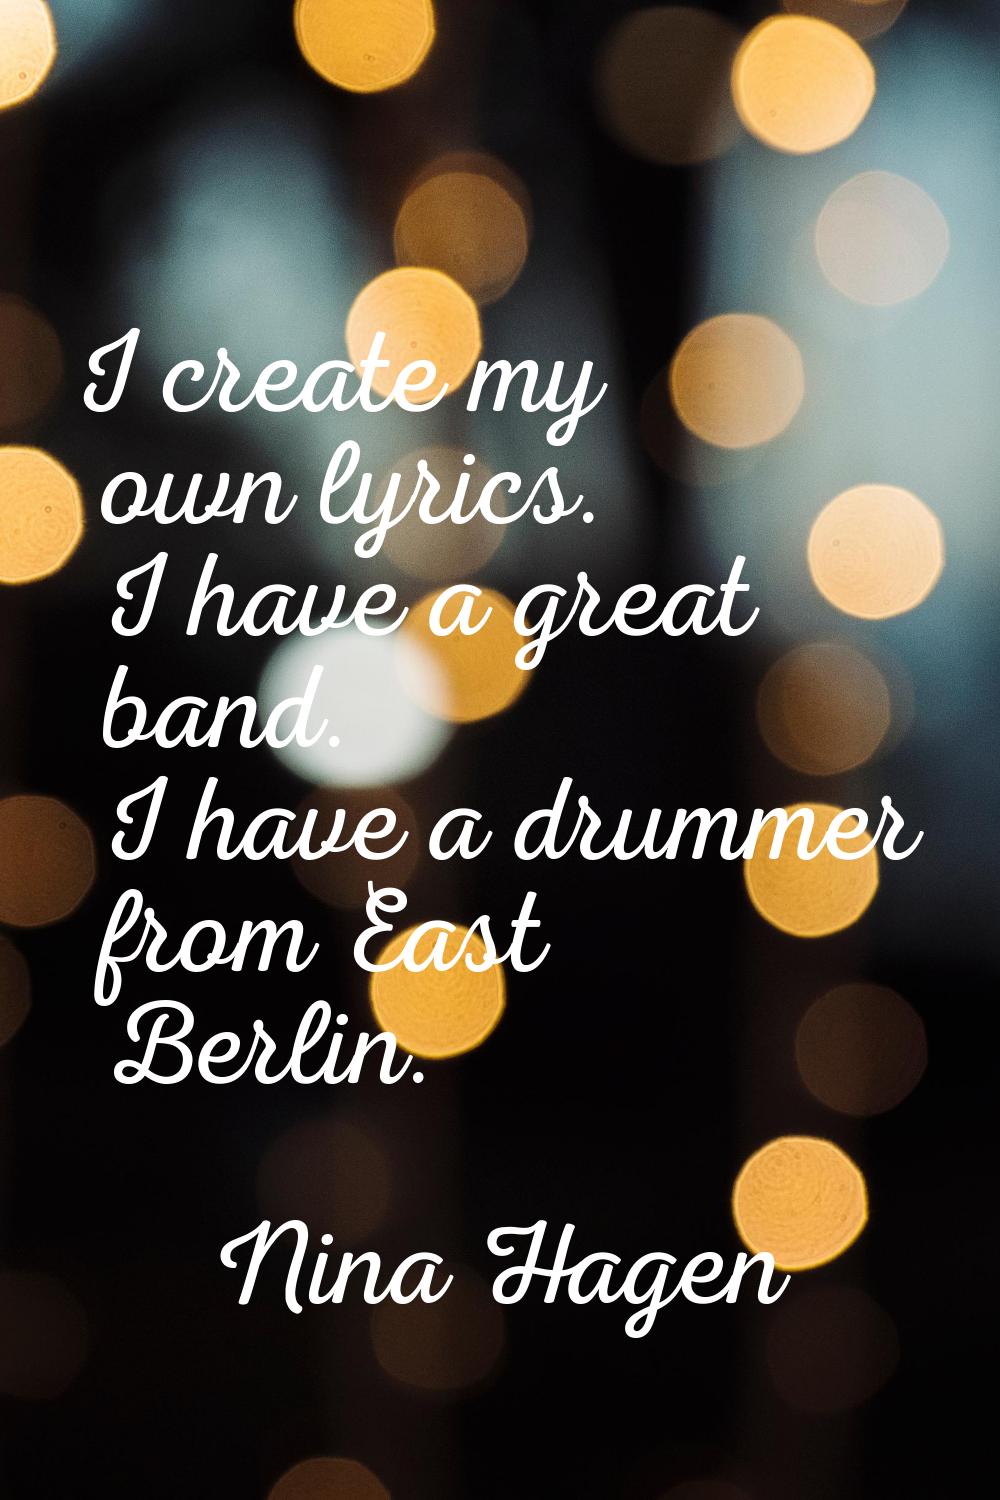 I create my own lyrics. I have a great band. I have a drummer from East Berlin.